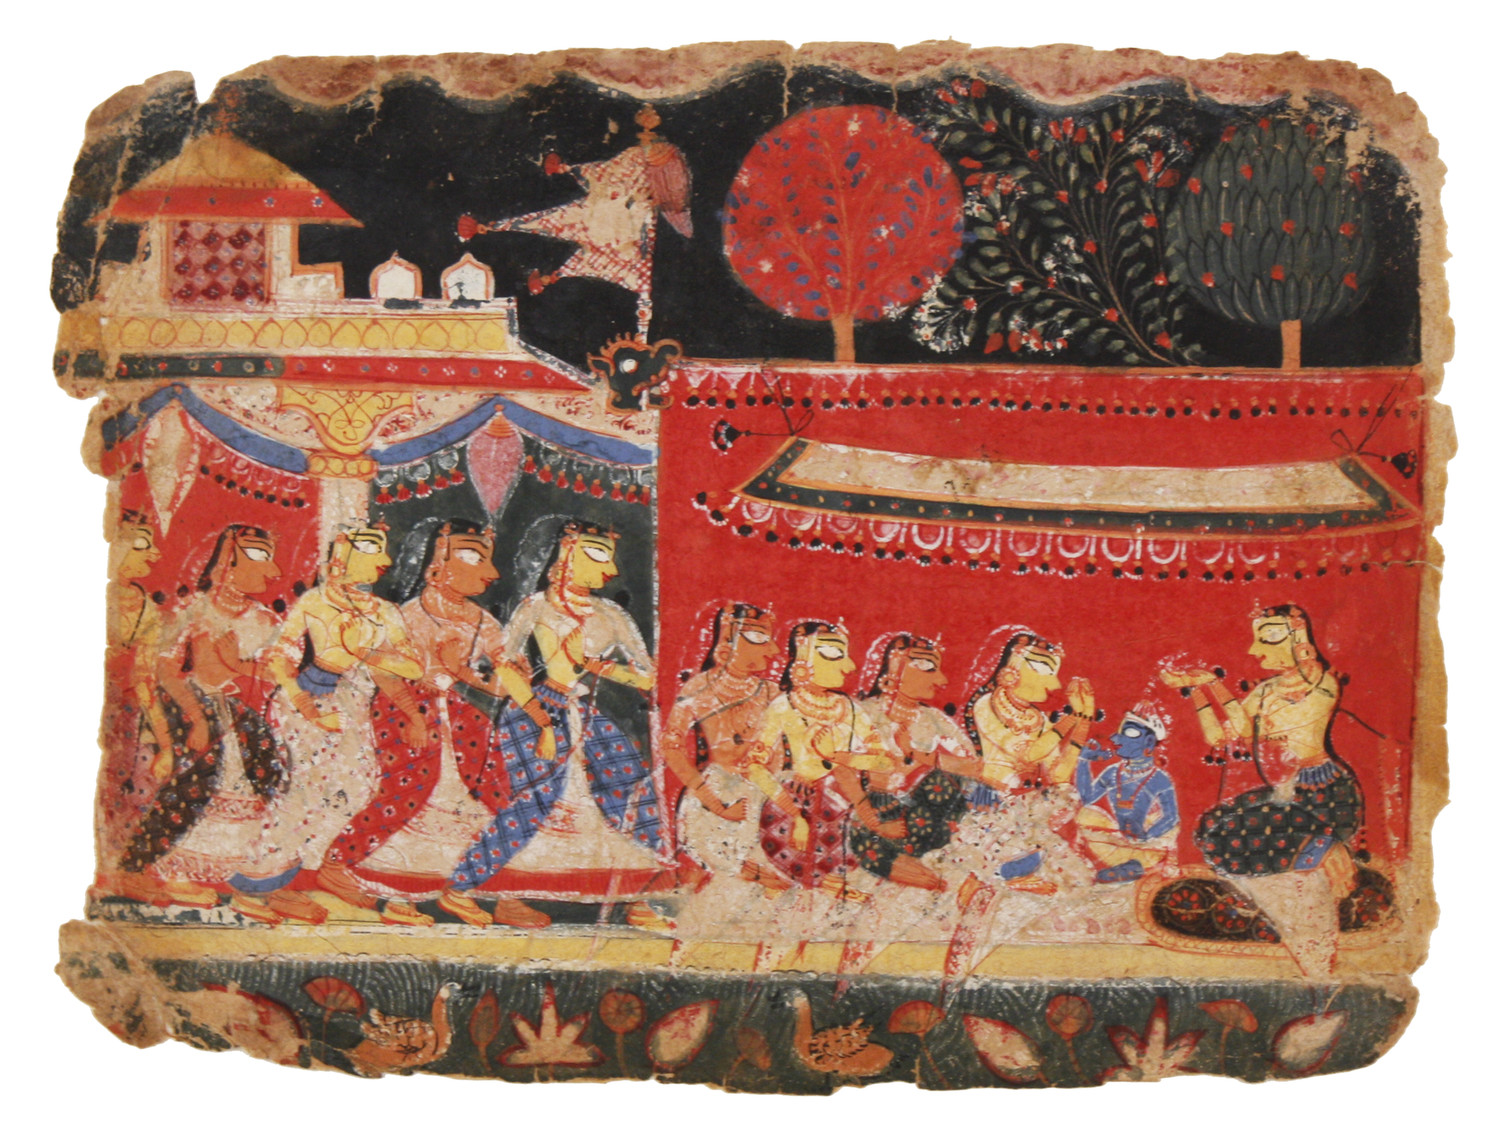 Unknown artist; North India; Leaf from a Bhagavata Purana series: The Cowherd Women of Vraja Observing the Vow of Katyayani, ca. 1520–1530. Opaque color on paper, 6 3/4 x 9 in (17.1 x 22.9 cm) Museum purchase with Curriculum Support Fund, 1994.11